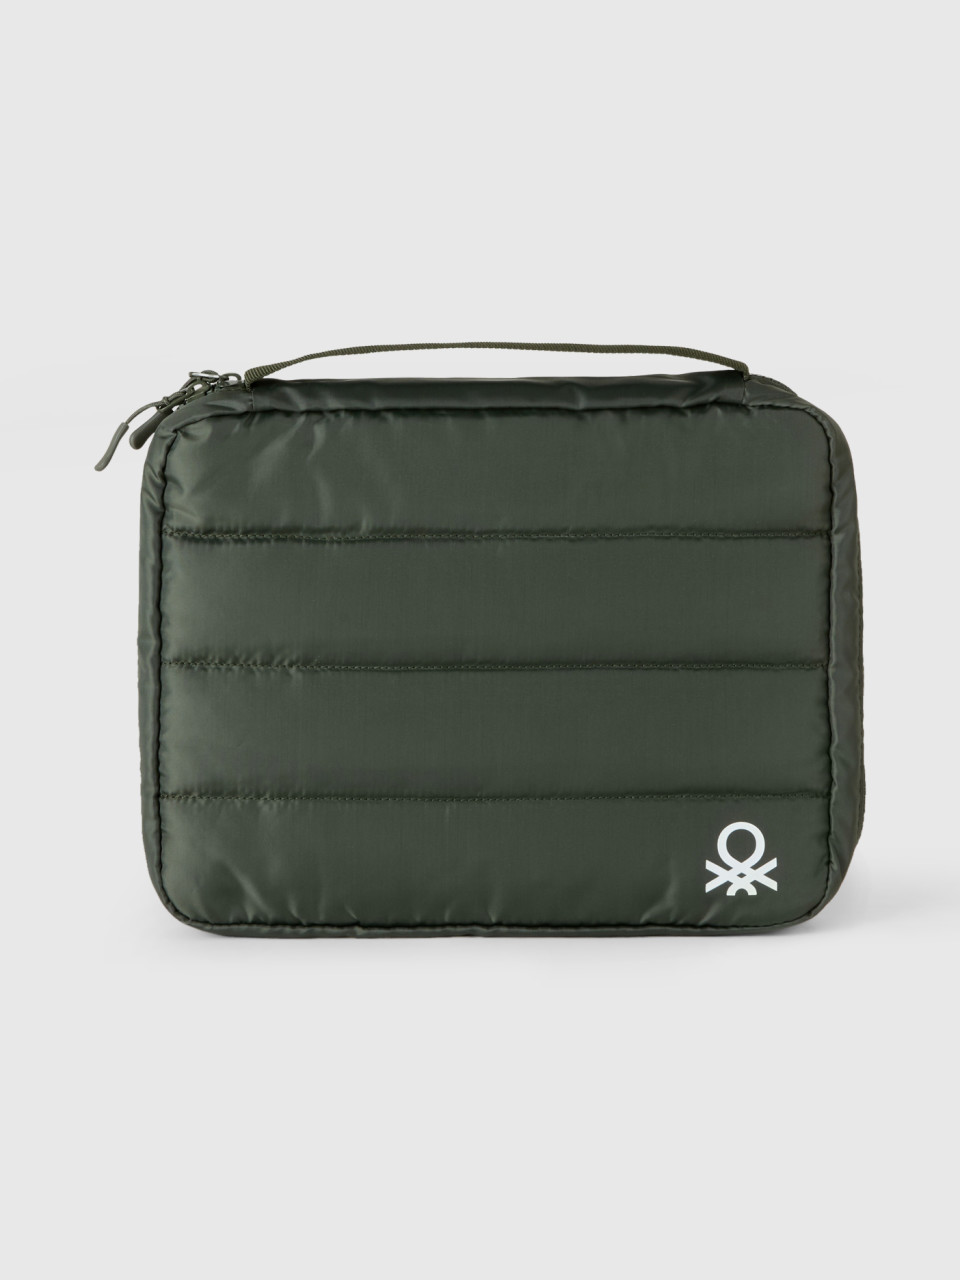 Benetton, Tablet And Accessory Case, Military Green, Women